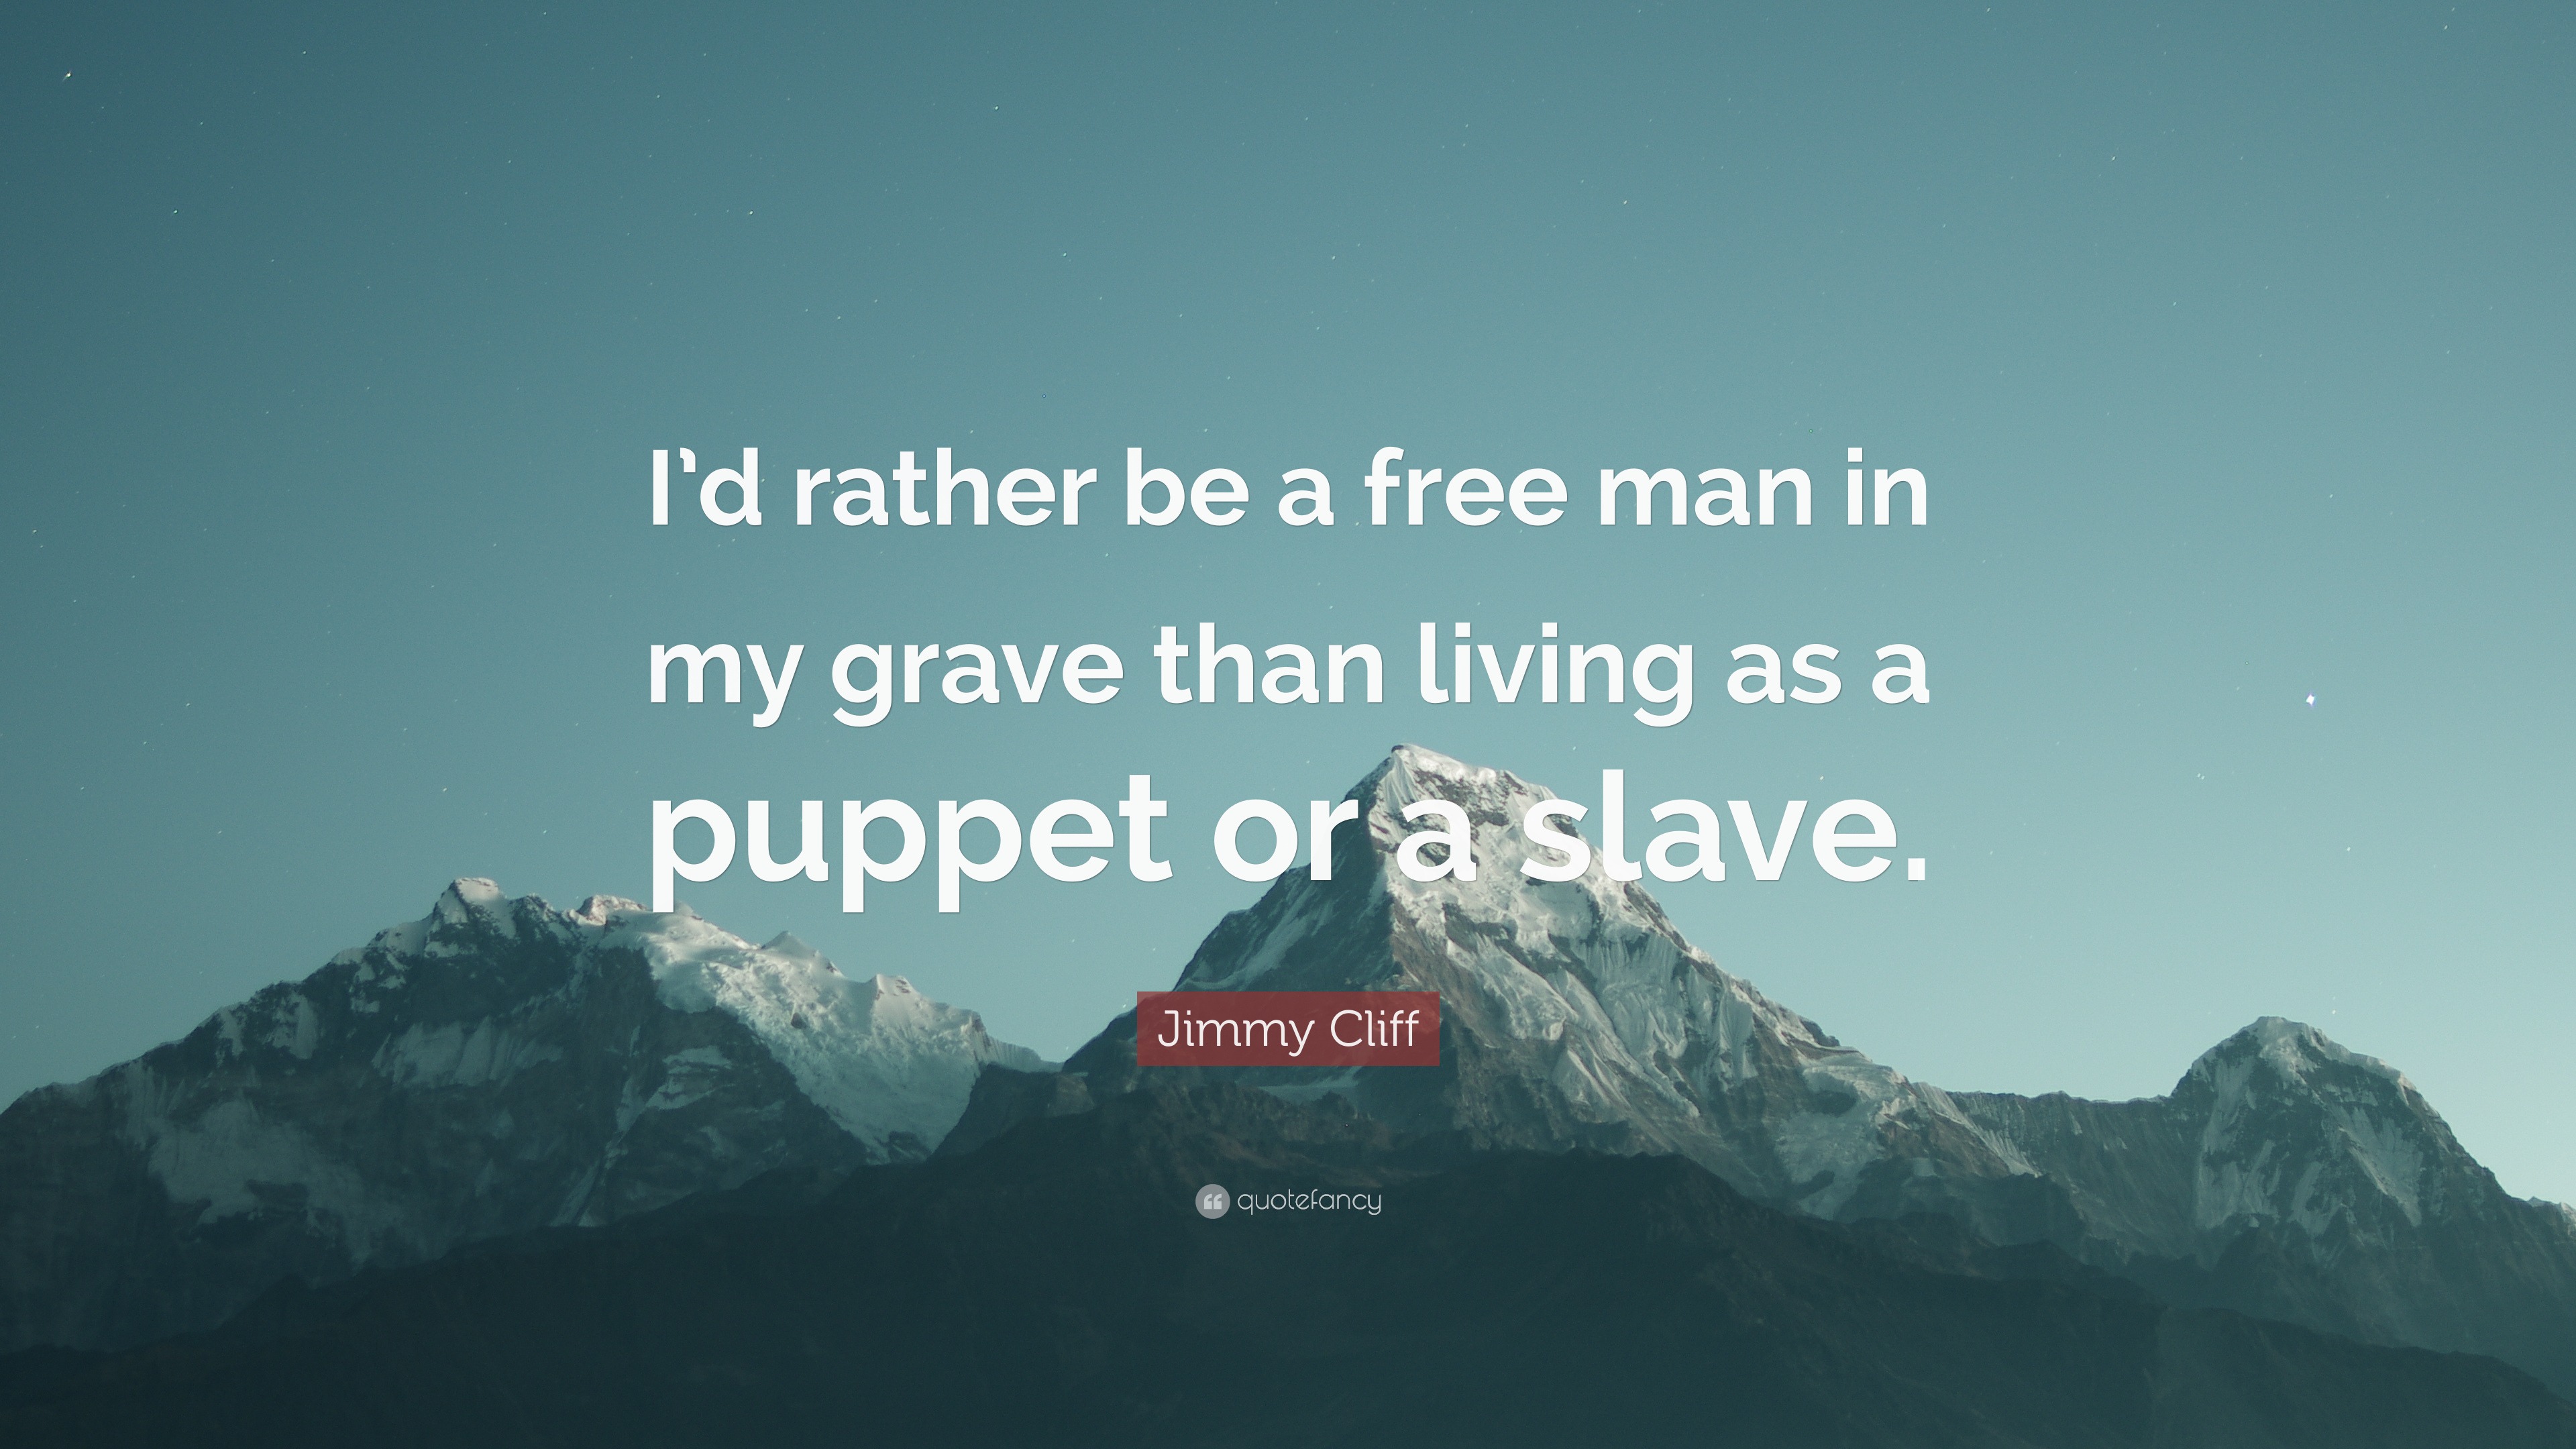 Jimmy Cliff Quote: “I’d rather be a free man in my grave than living as ...